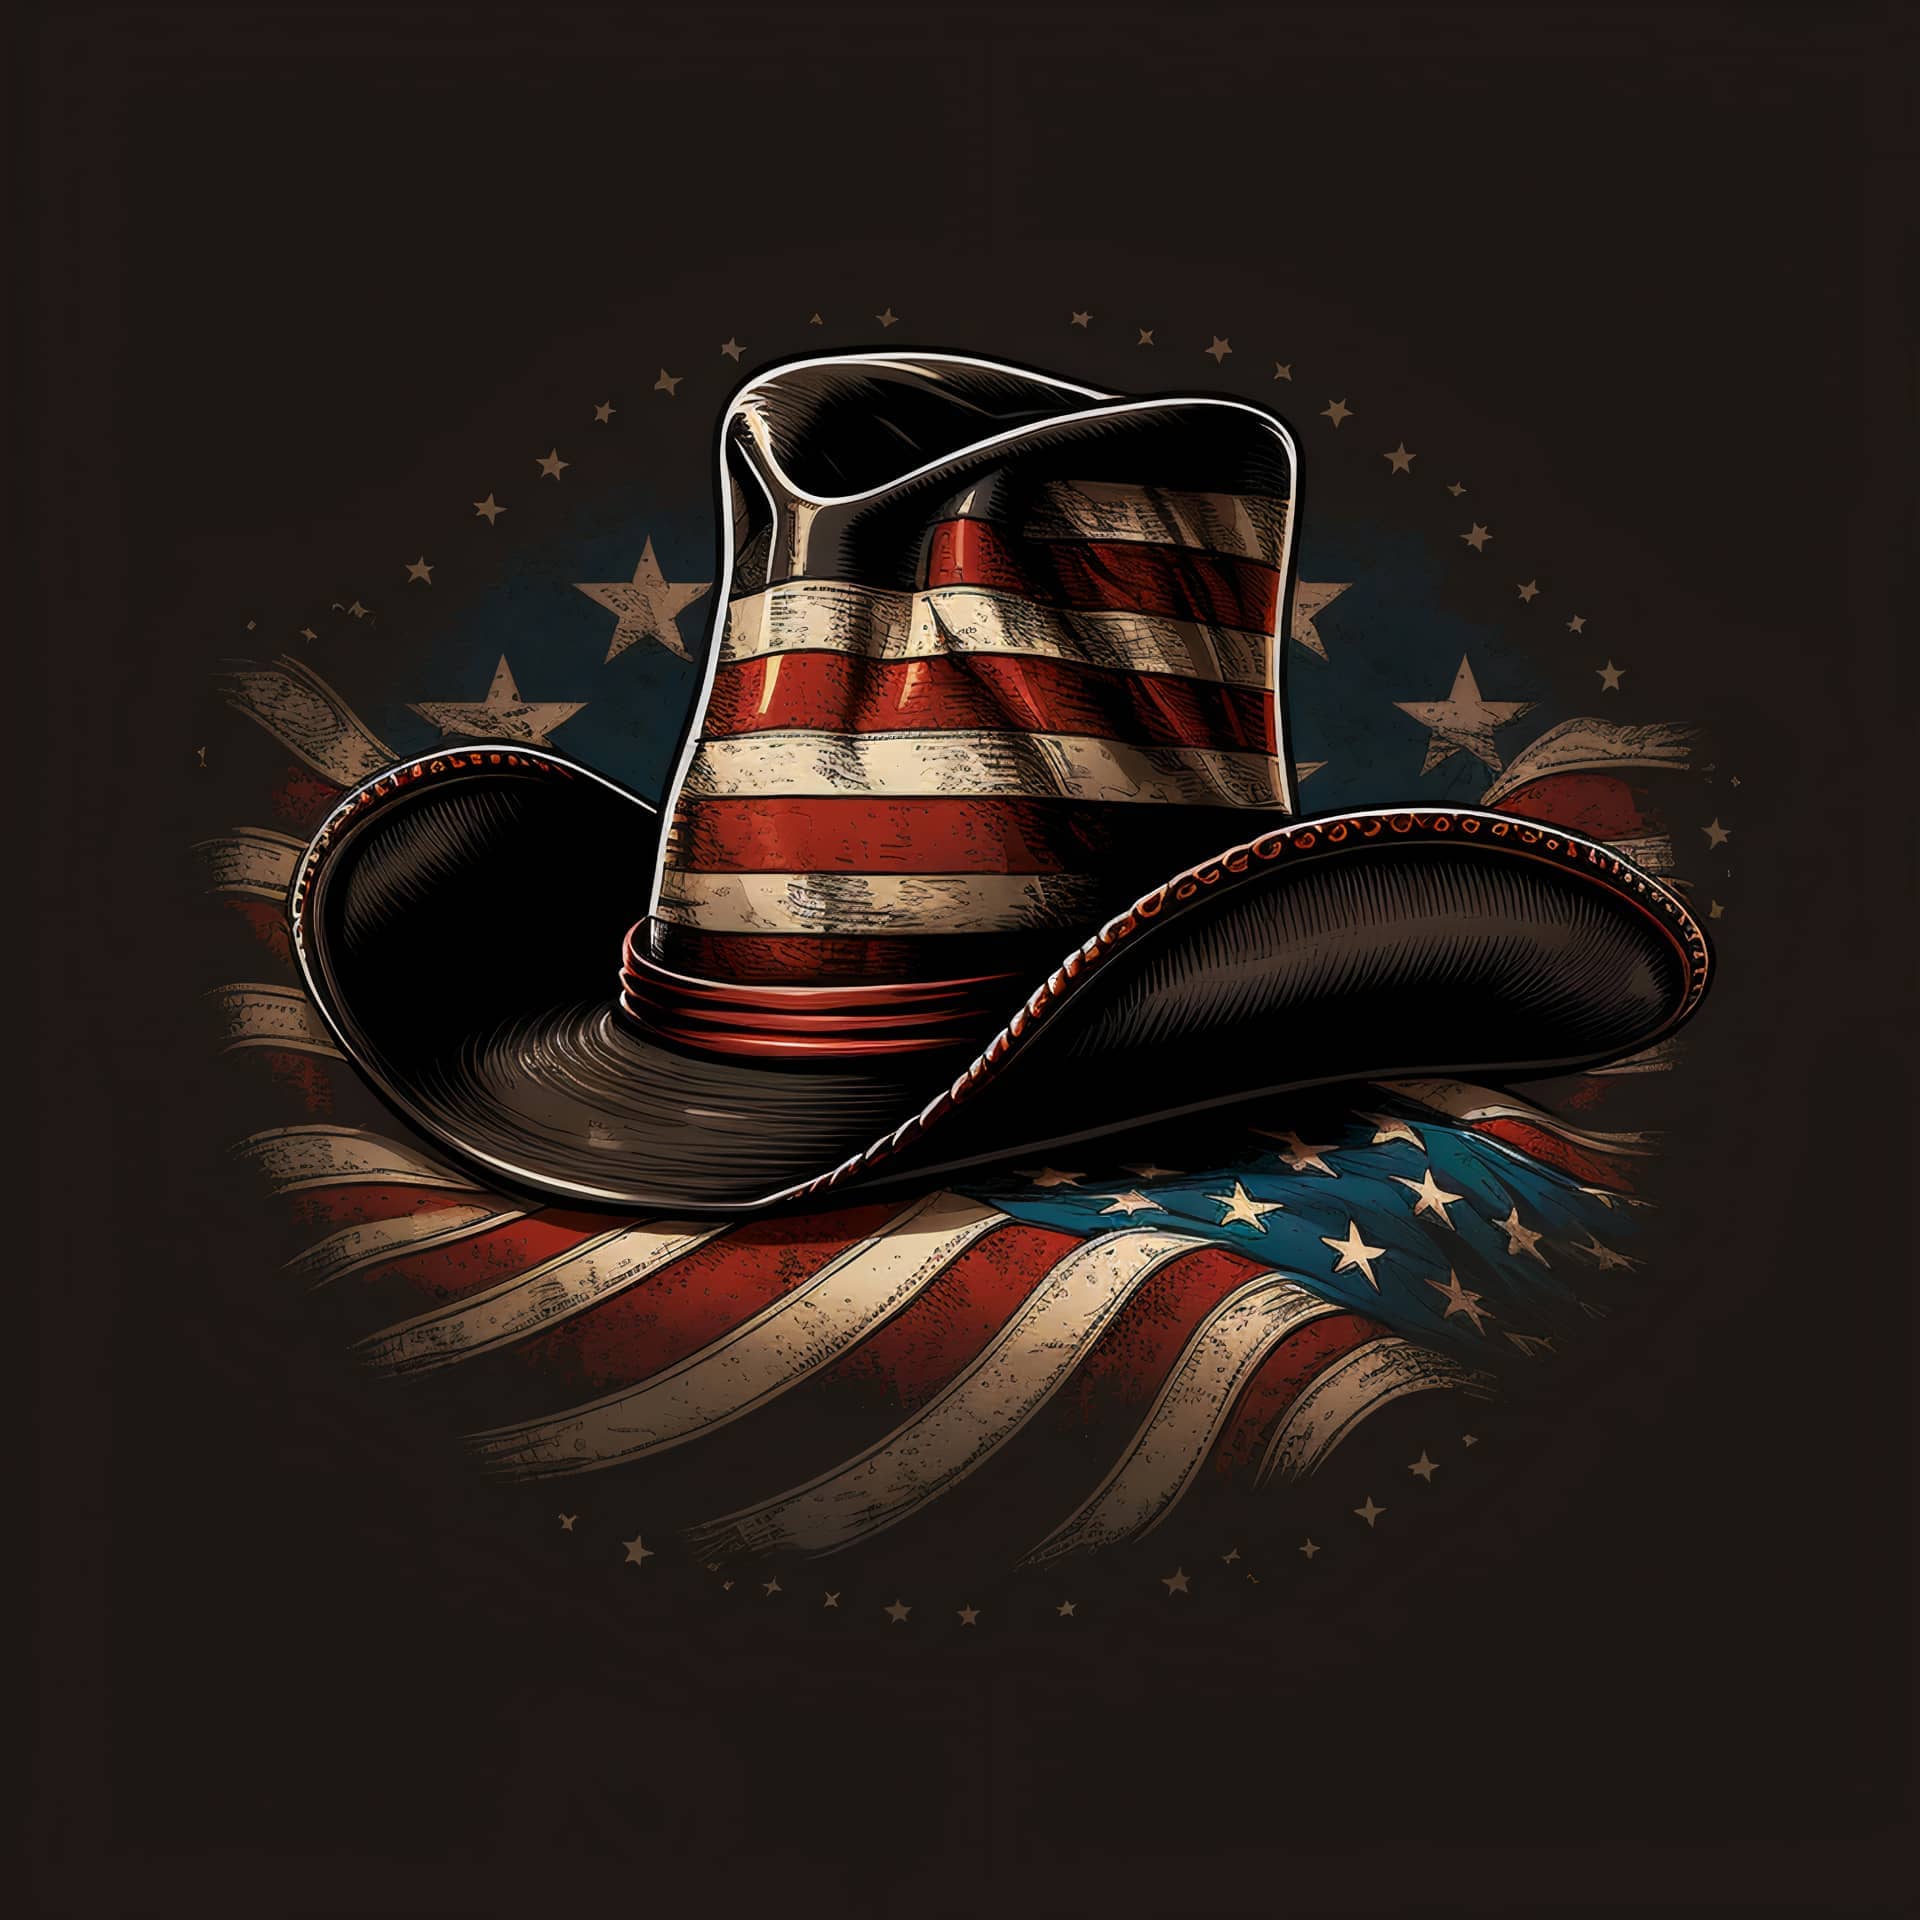 Cowboy hat design with american flag